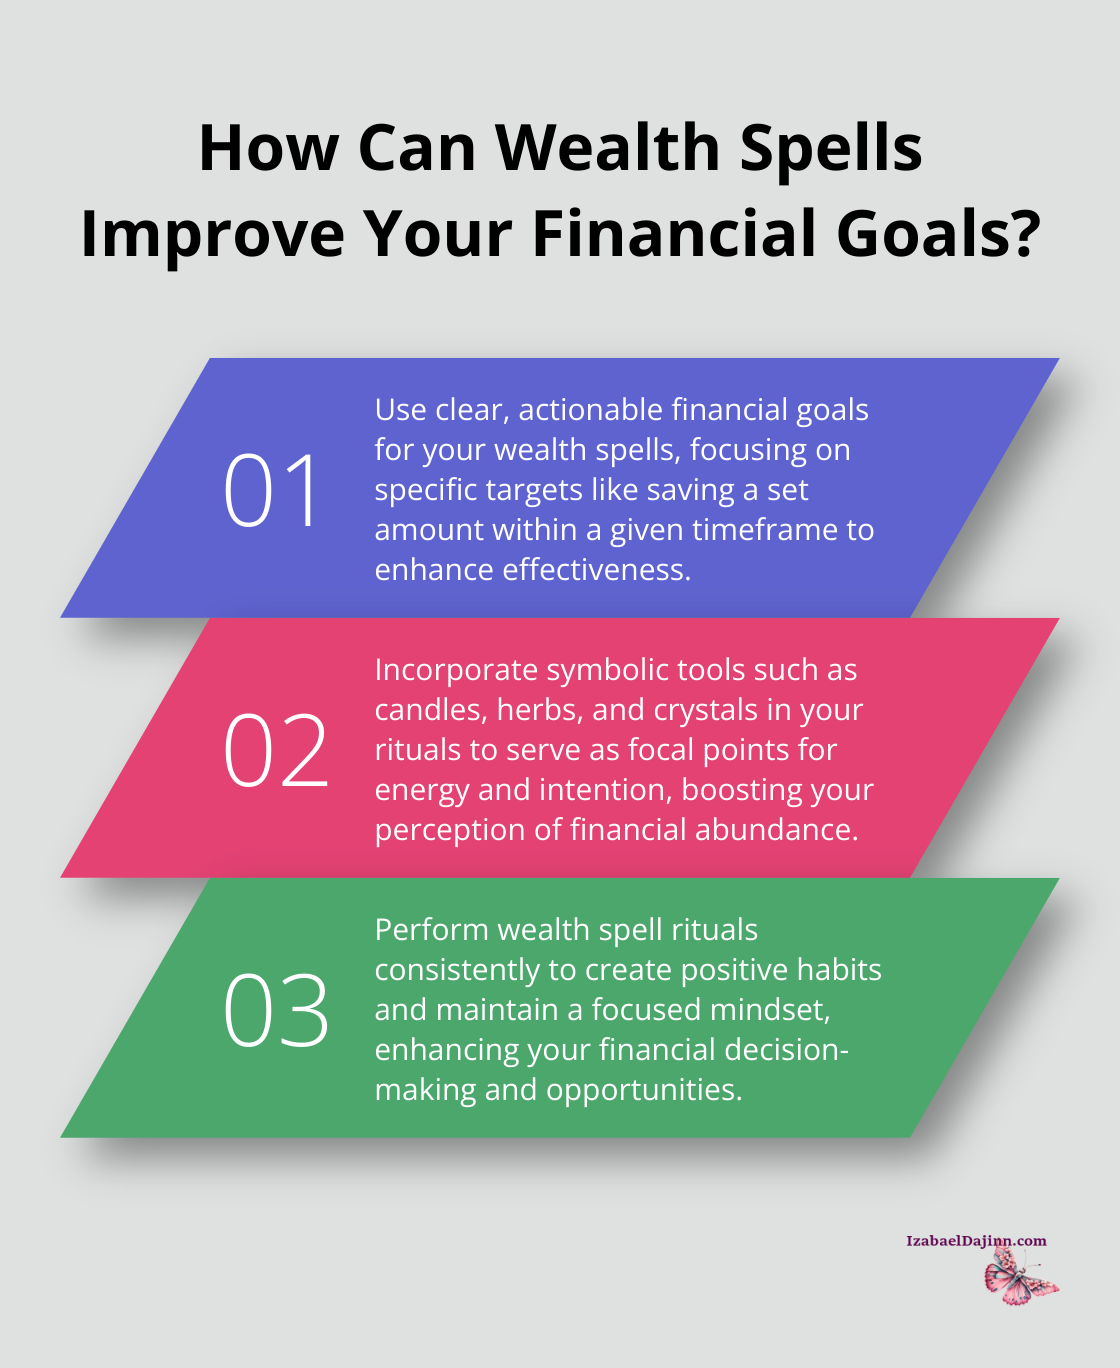 Fact - How Can Wealth Spells Improve Your Financial Goals?